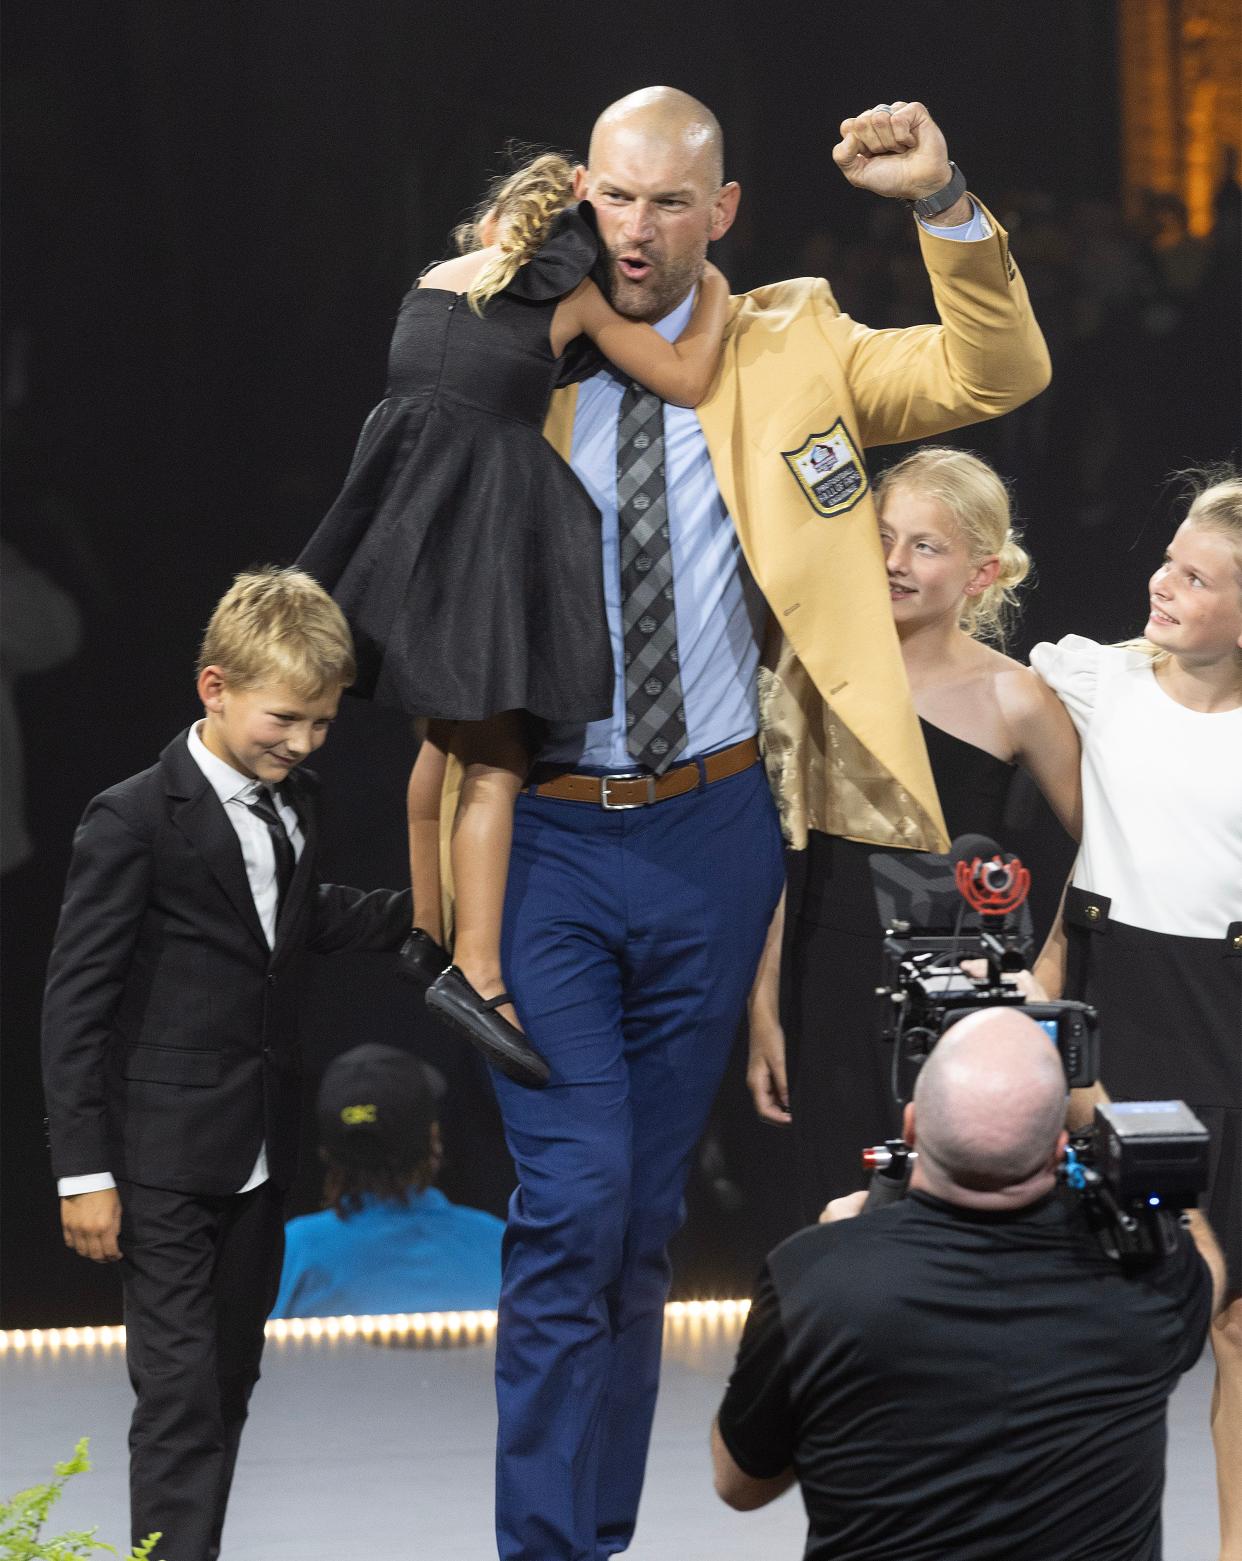 Joe Thomas celebrates with his children onstage at the 2023 Hall of Fame Enshrinees' Gold Jacket Dinner held at the Canton Civic Center. 